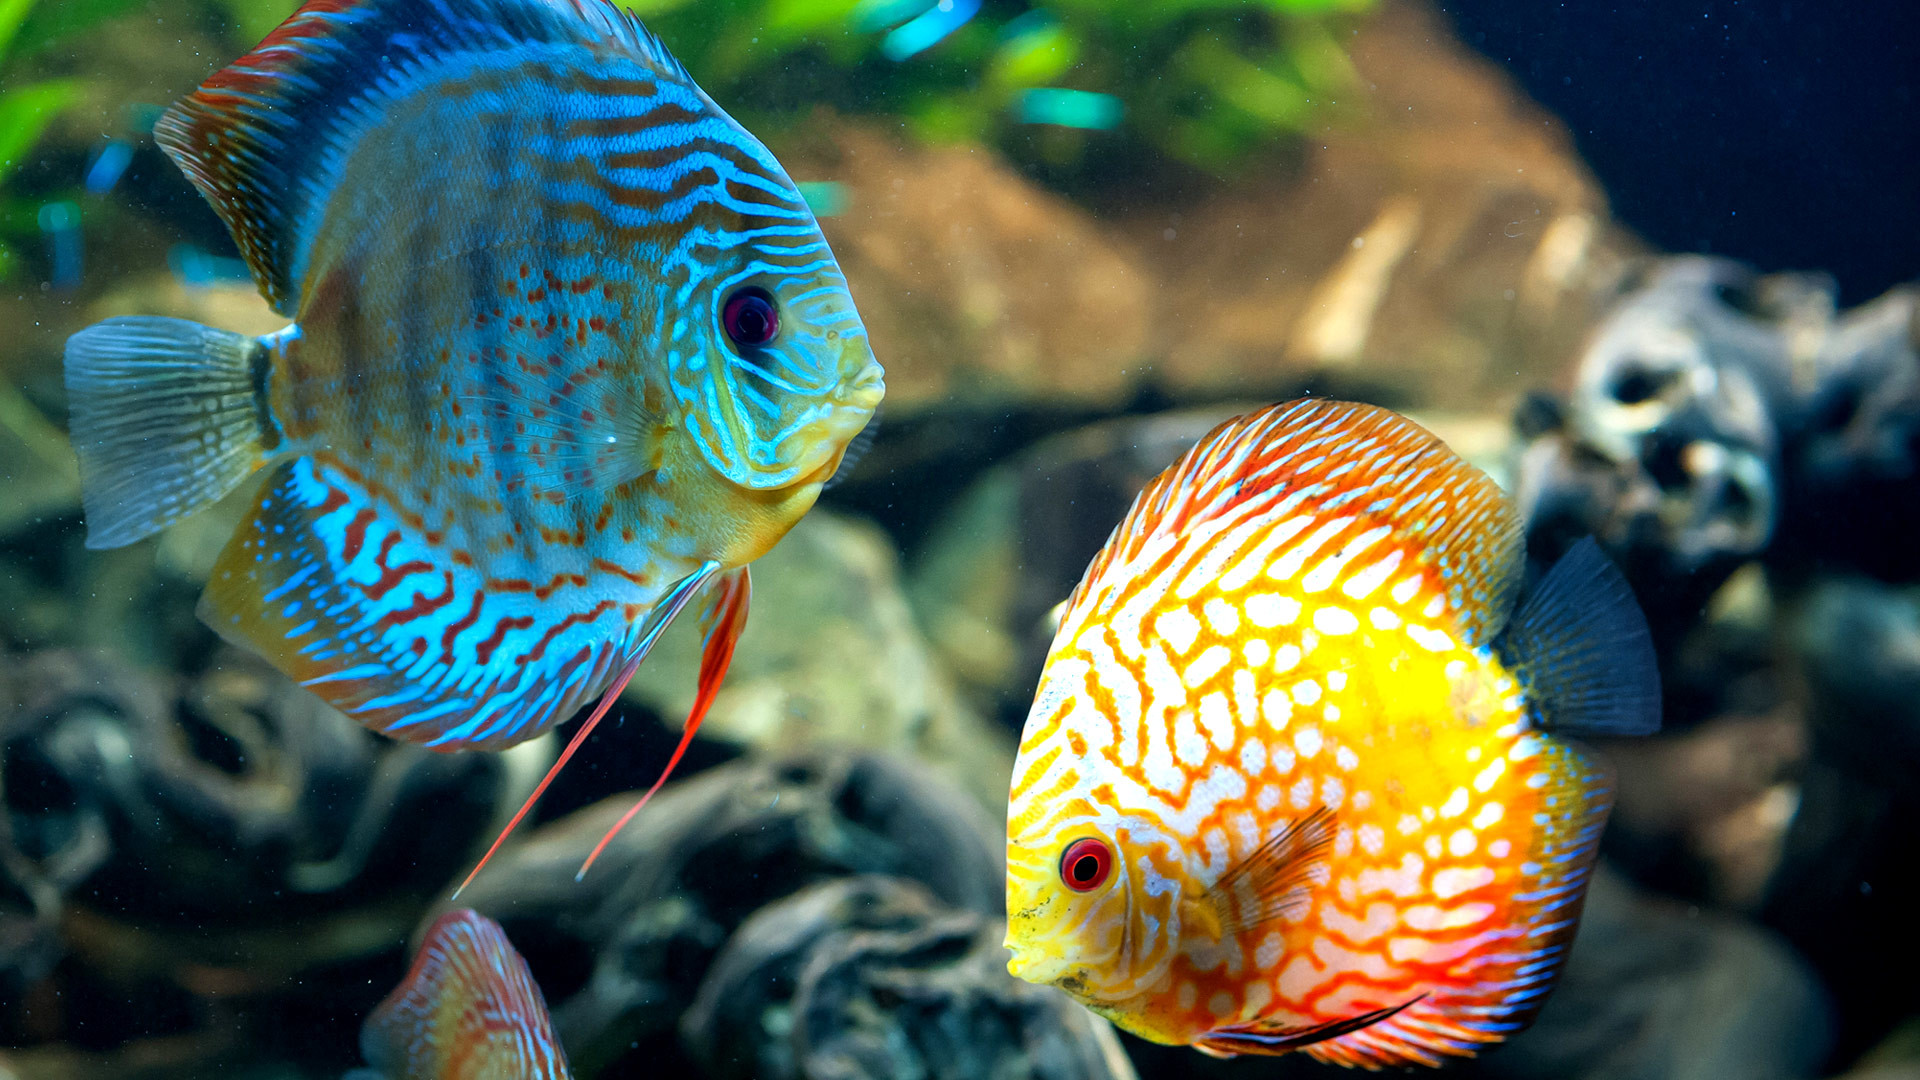 1920x1080 See Here Colorful Fish HD Wallpapers Download And Beautiful Fish HD images  and Sweet Colorful Fish Latest Screensaver Download, Sea Creature 3d  pictures ...